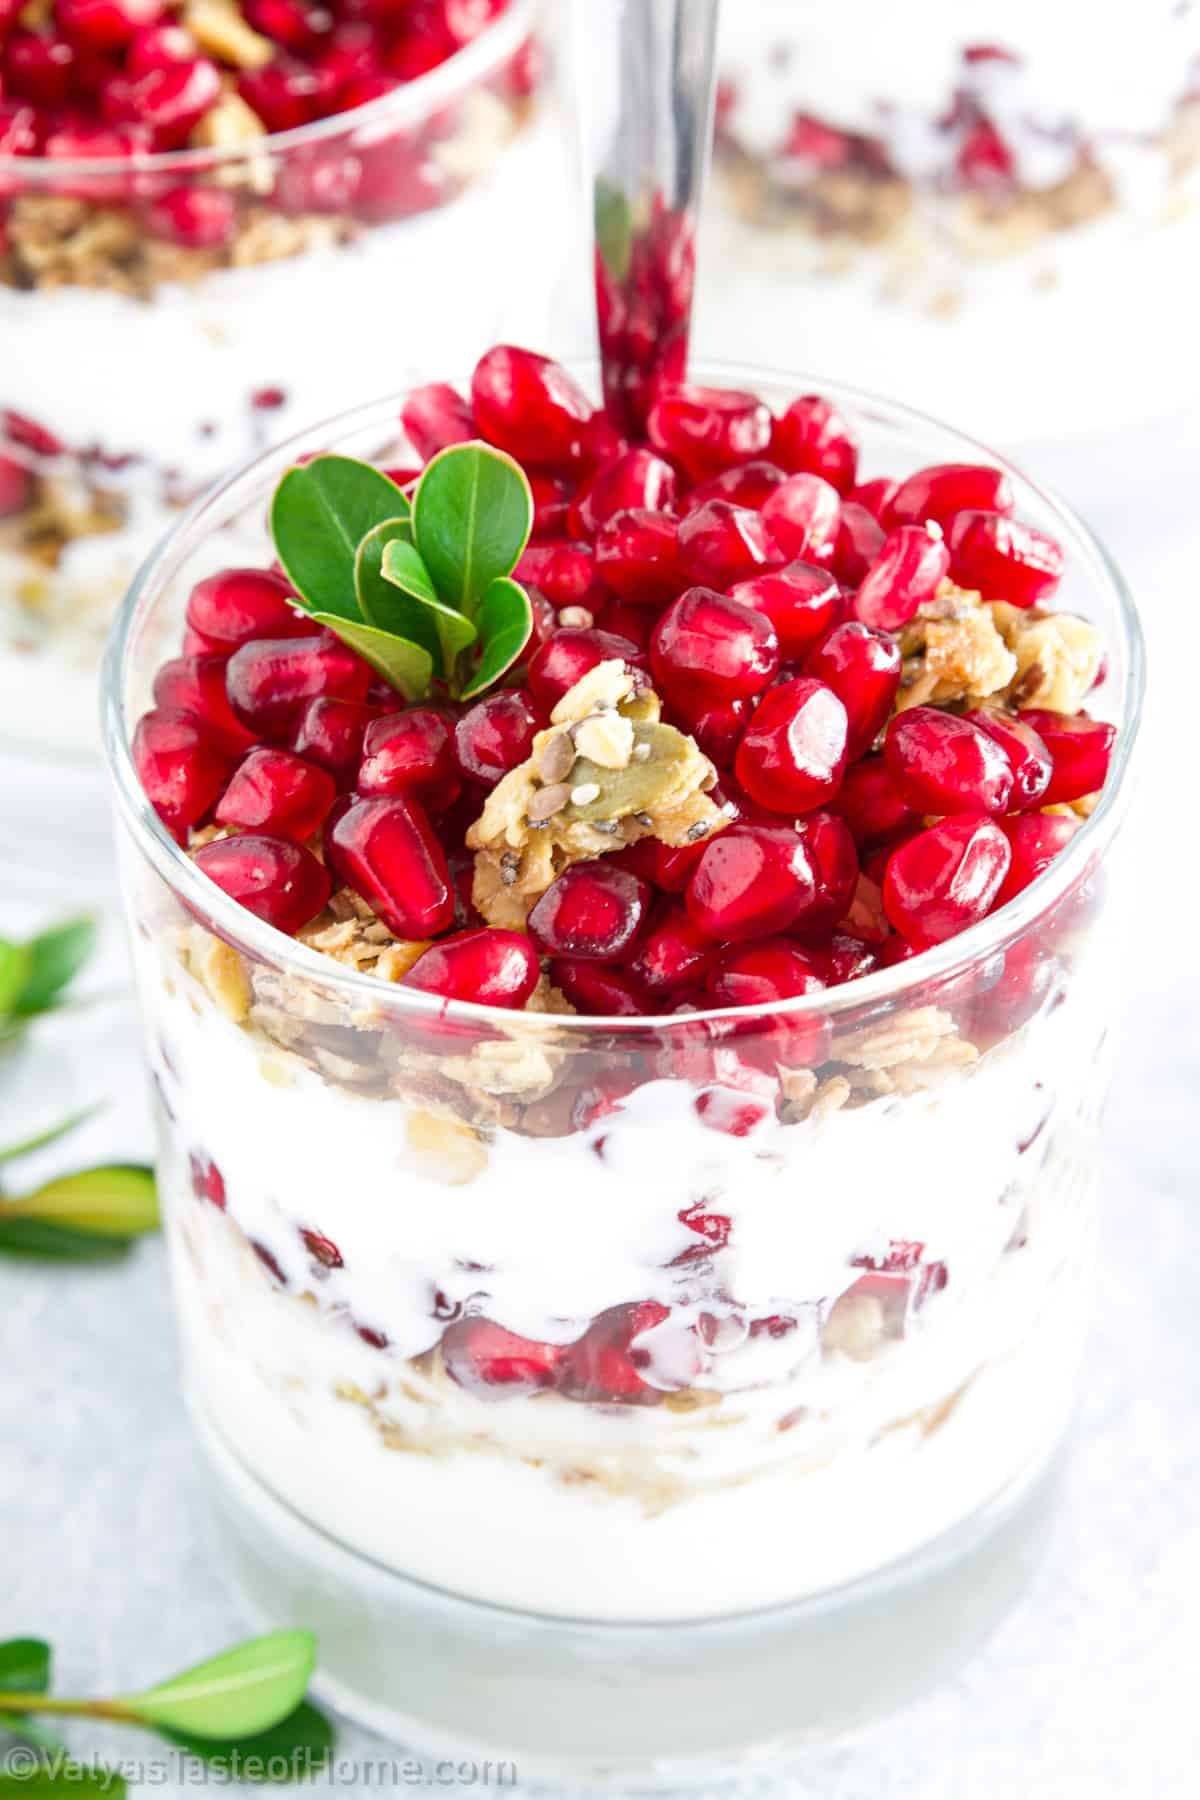 A pomegranate parfait is a delicious layered dessert or breakfast parfait that combines the sweet and tangy flavors of pomegranate seeds with the creamy texture of plain Greek yogurt and the crunchy goodness of granola. 